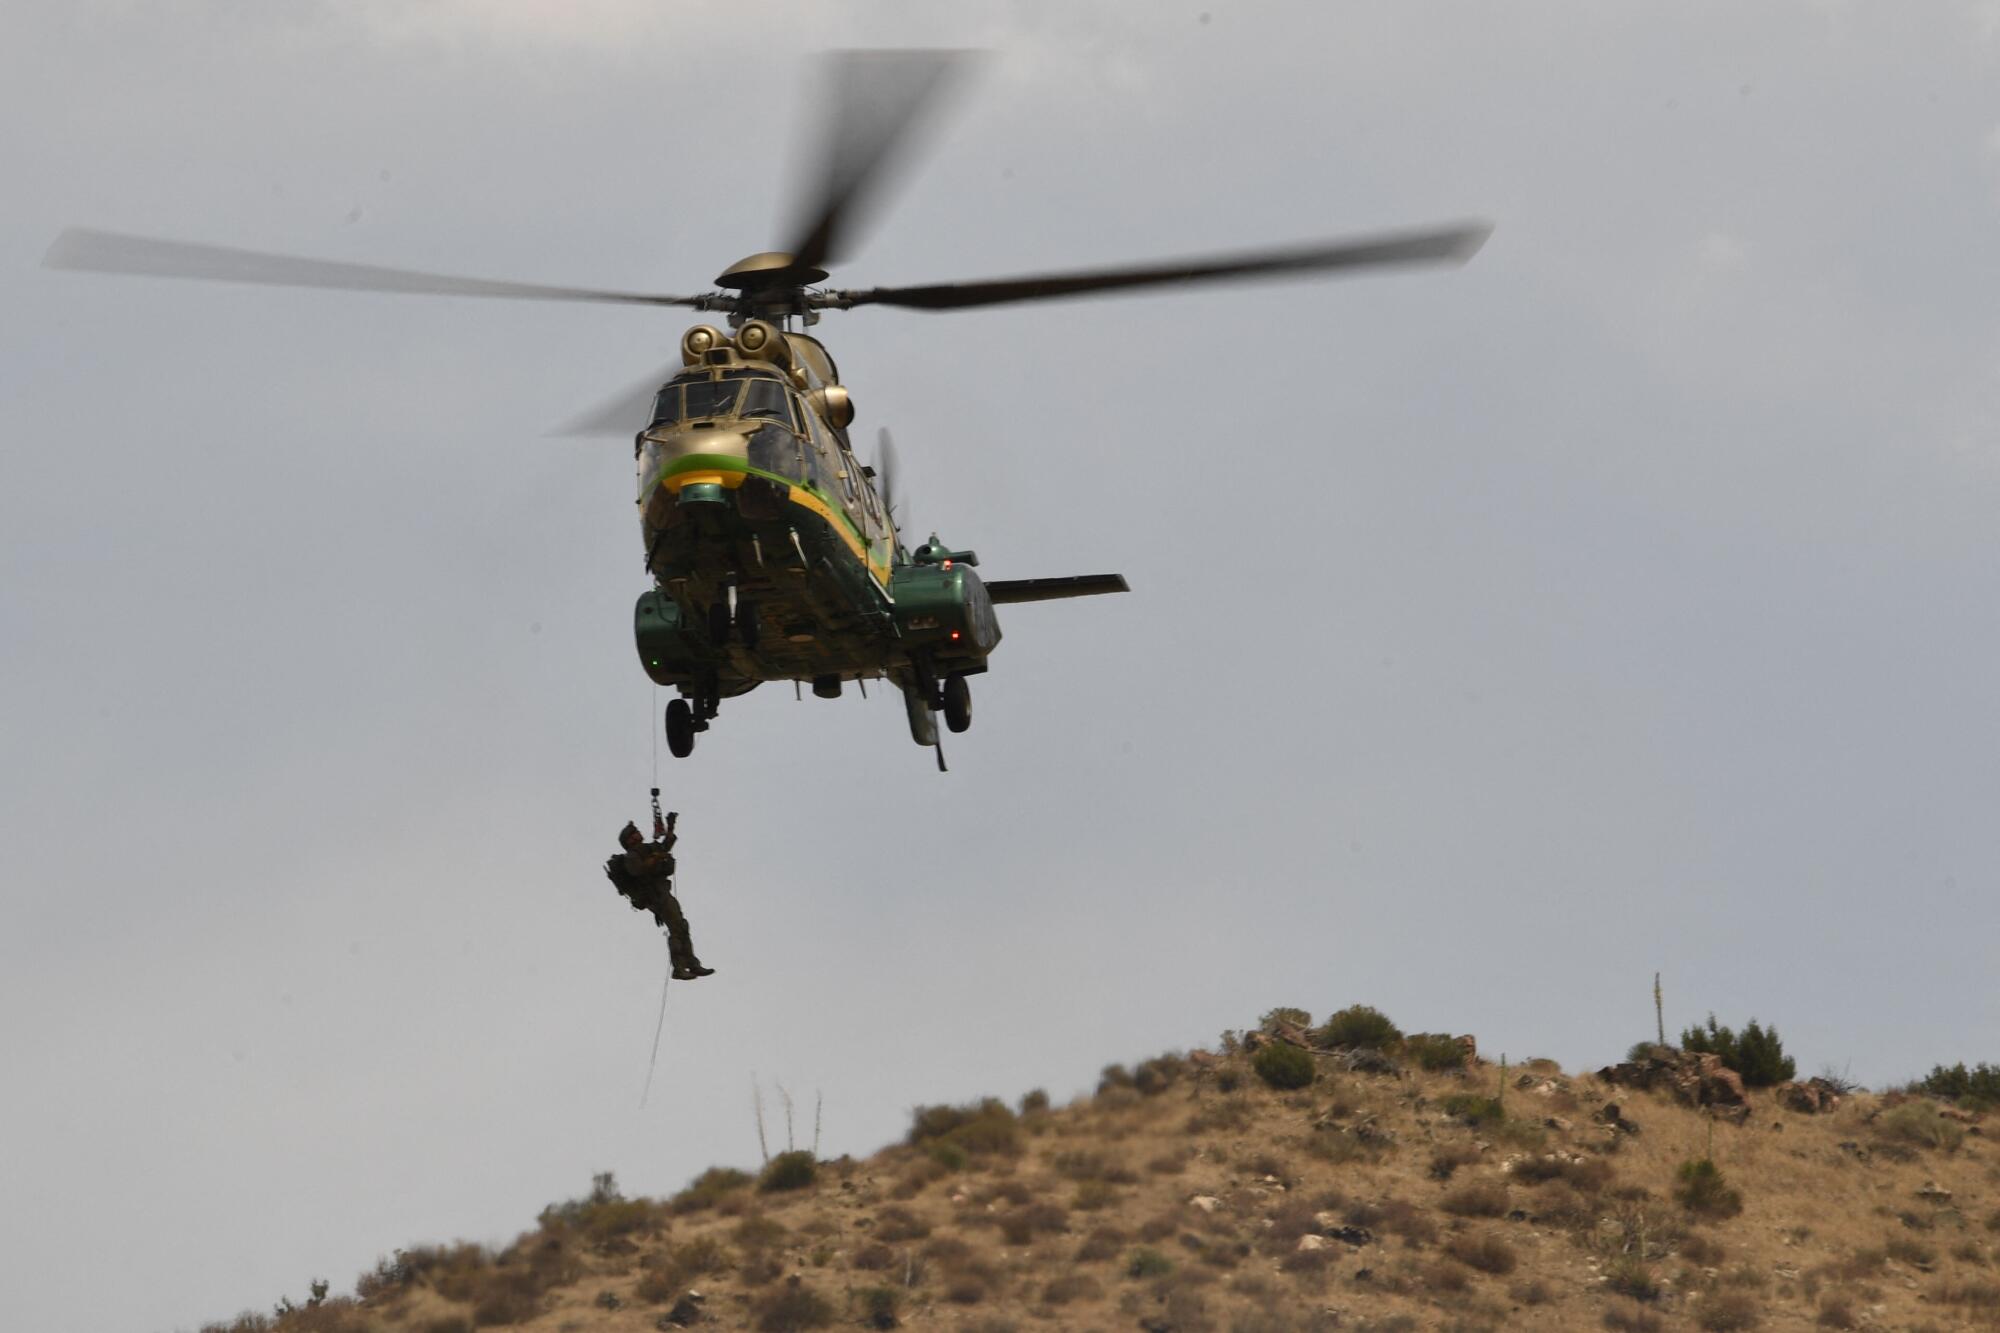 A man dangles from a cable attached to a helicopter hovering over a hillside.